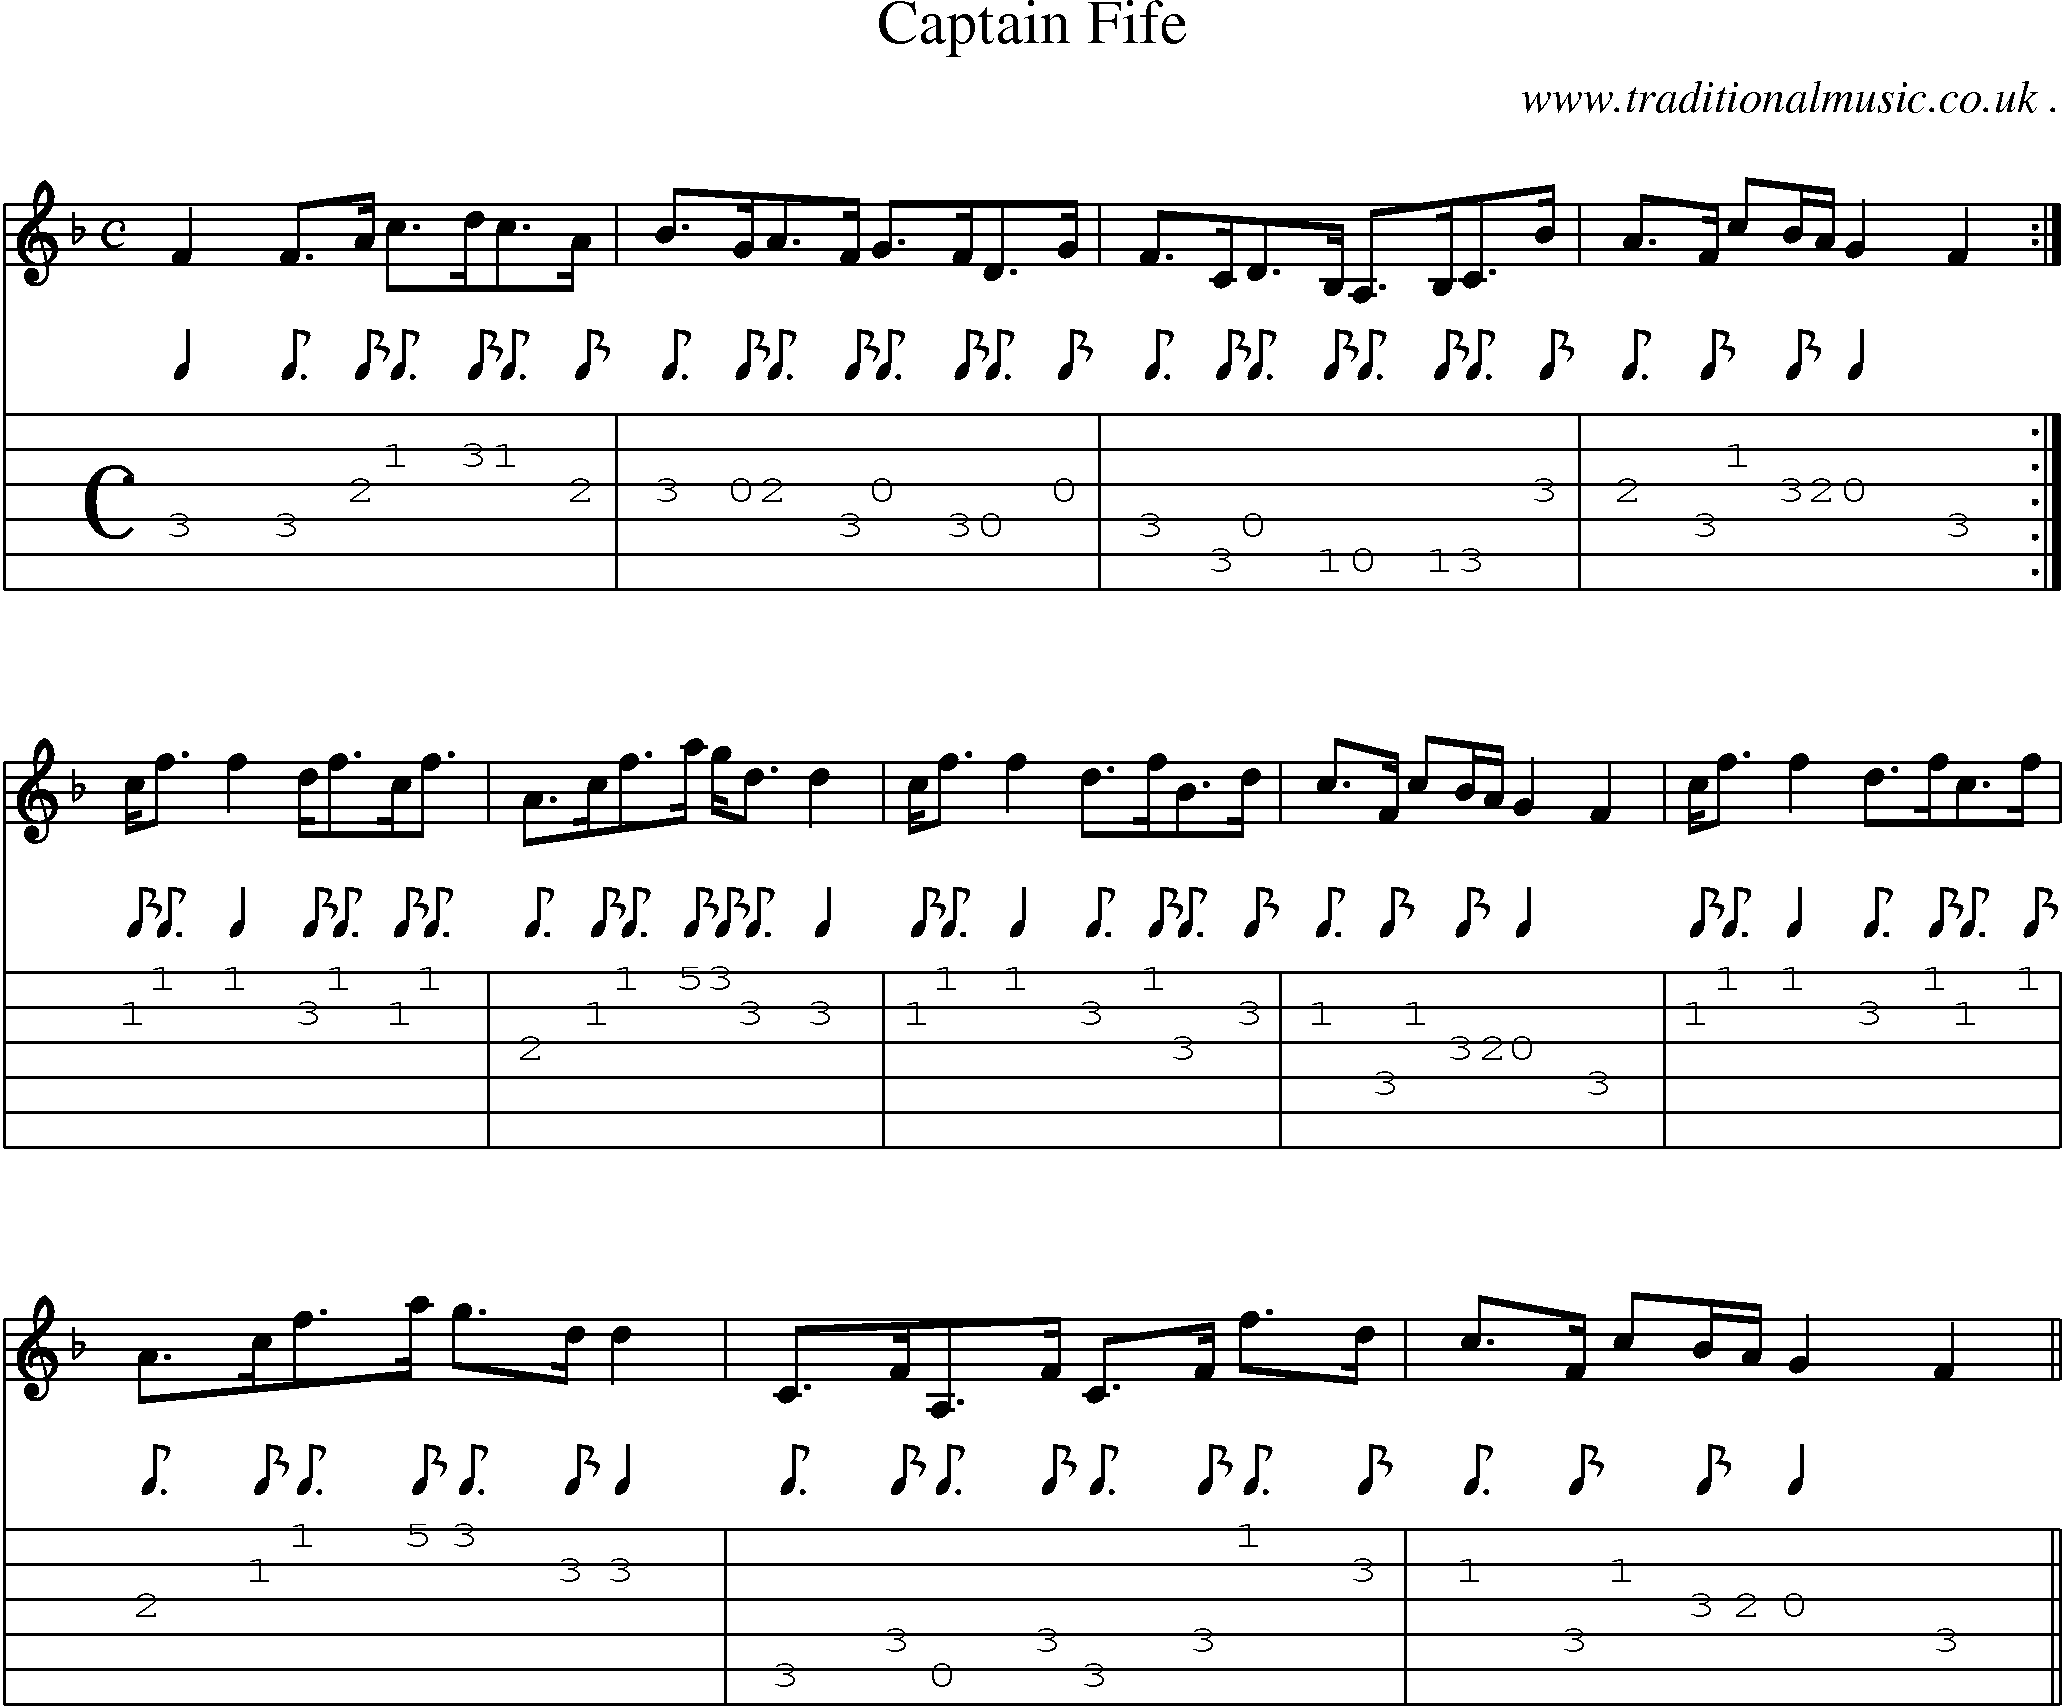 Sheet-music  score, Chords and Guitar Tabs for Captain Fife